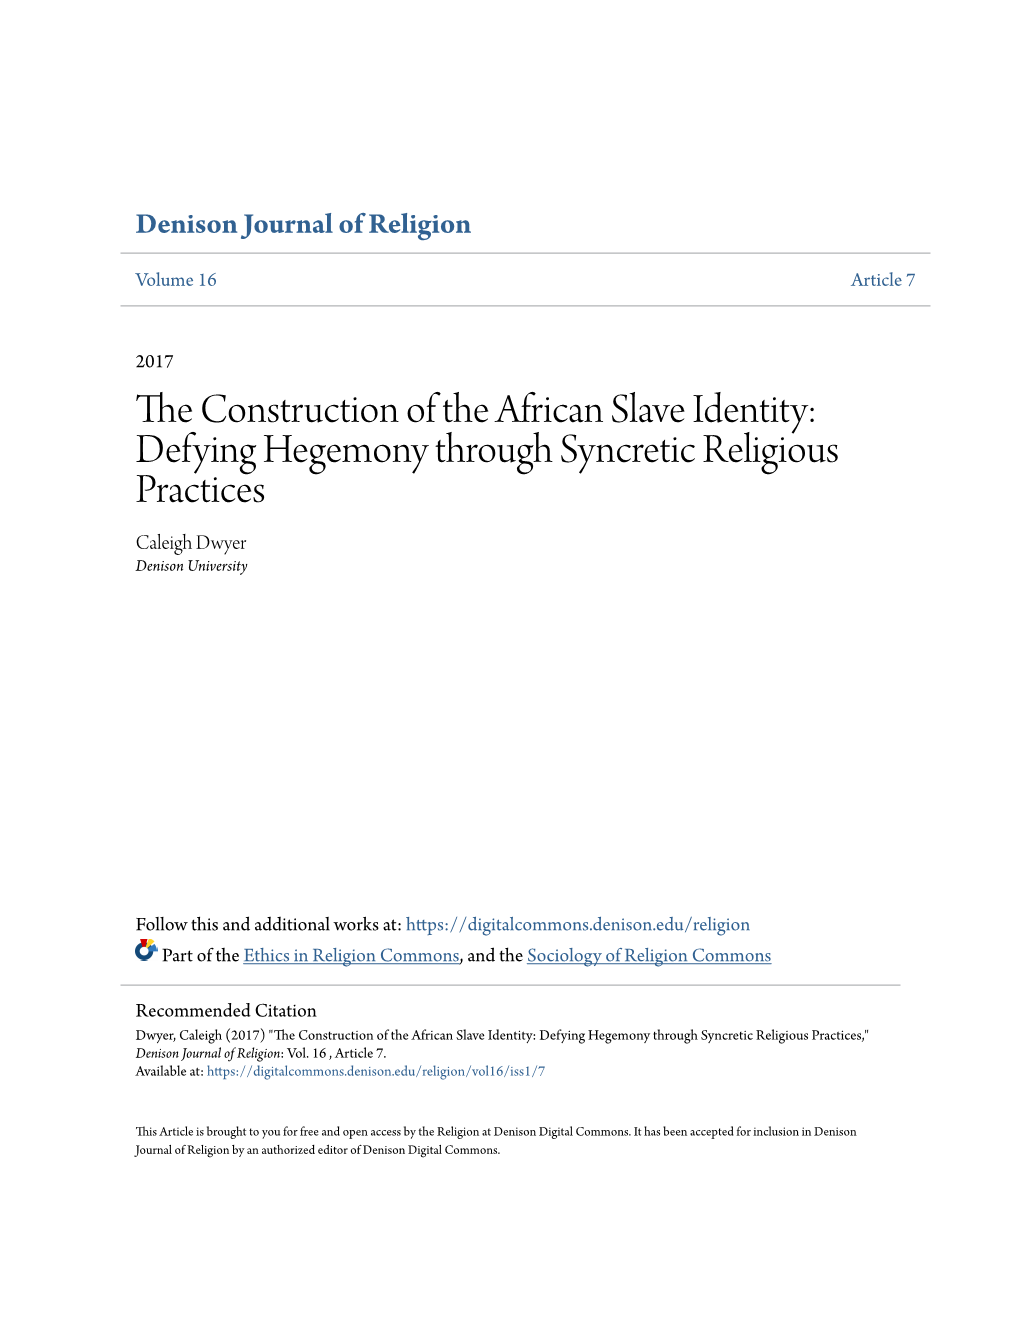 The Construction of the African Slave Identity: Defying Hegemony Through Syncretic Religious Practices